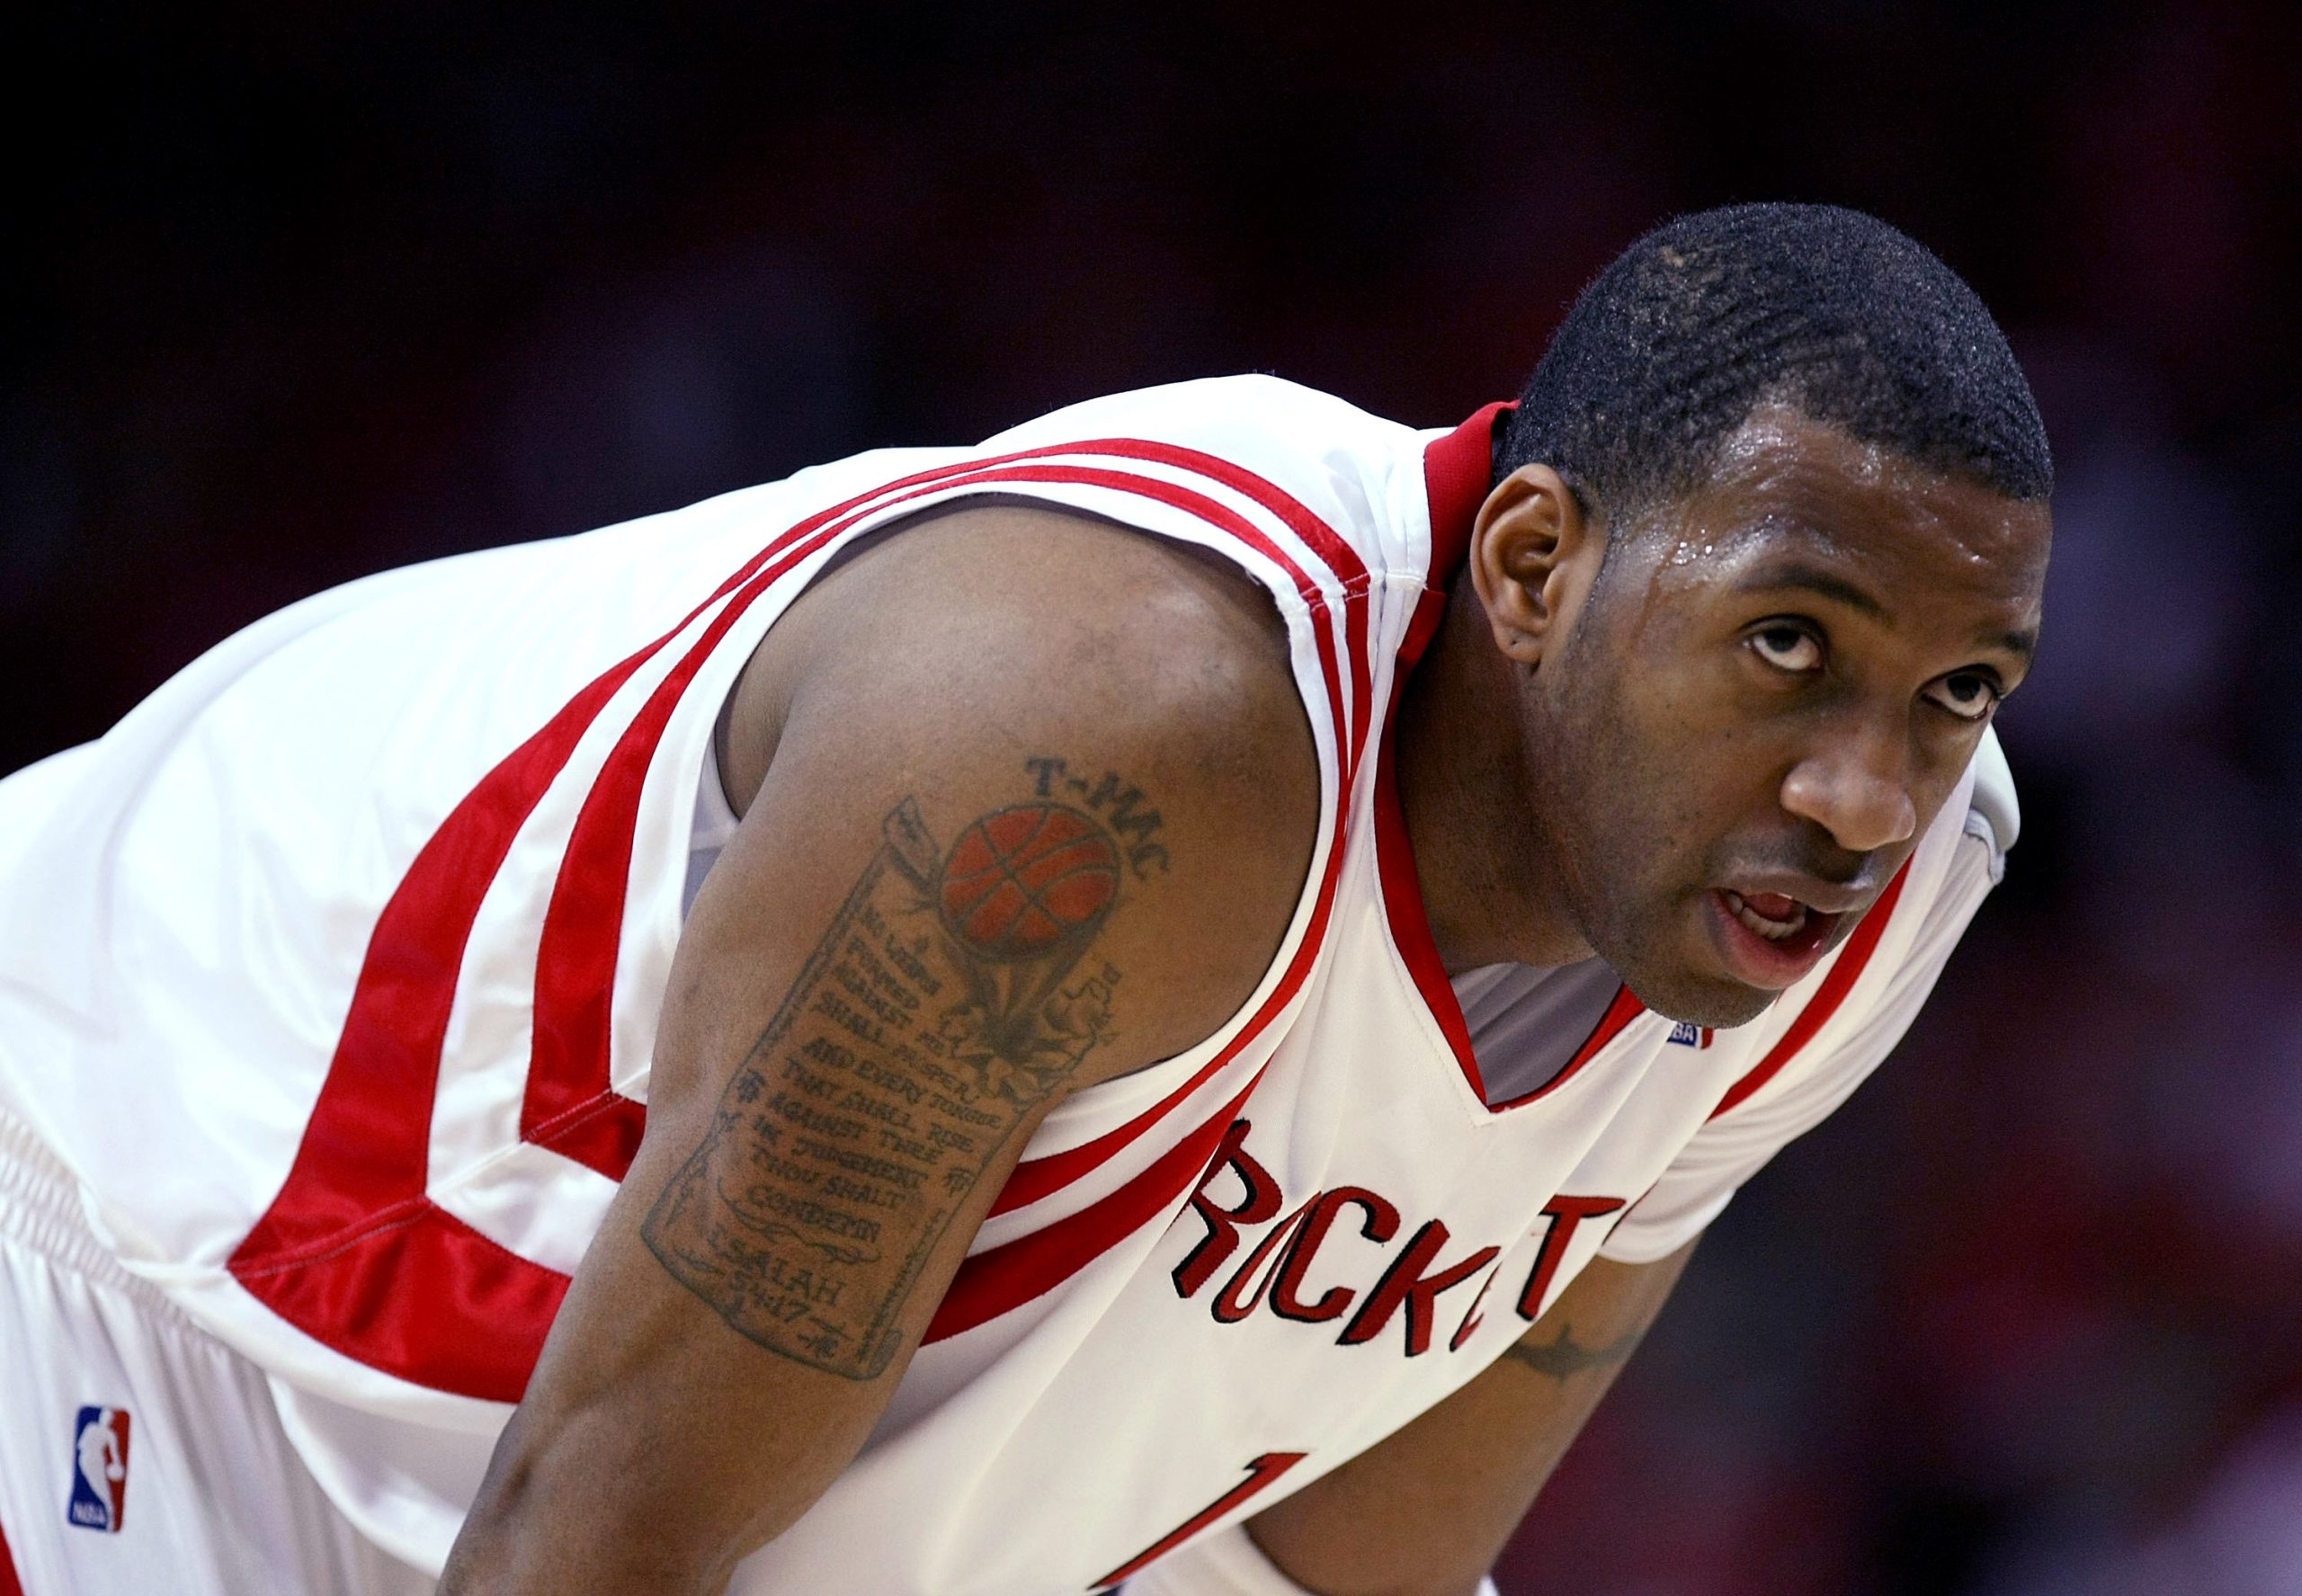 Tracy McGrady of the Houston Rockets waits to take a foul shot against the Utah Jazz.